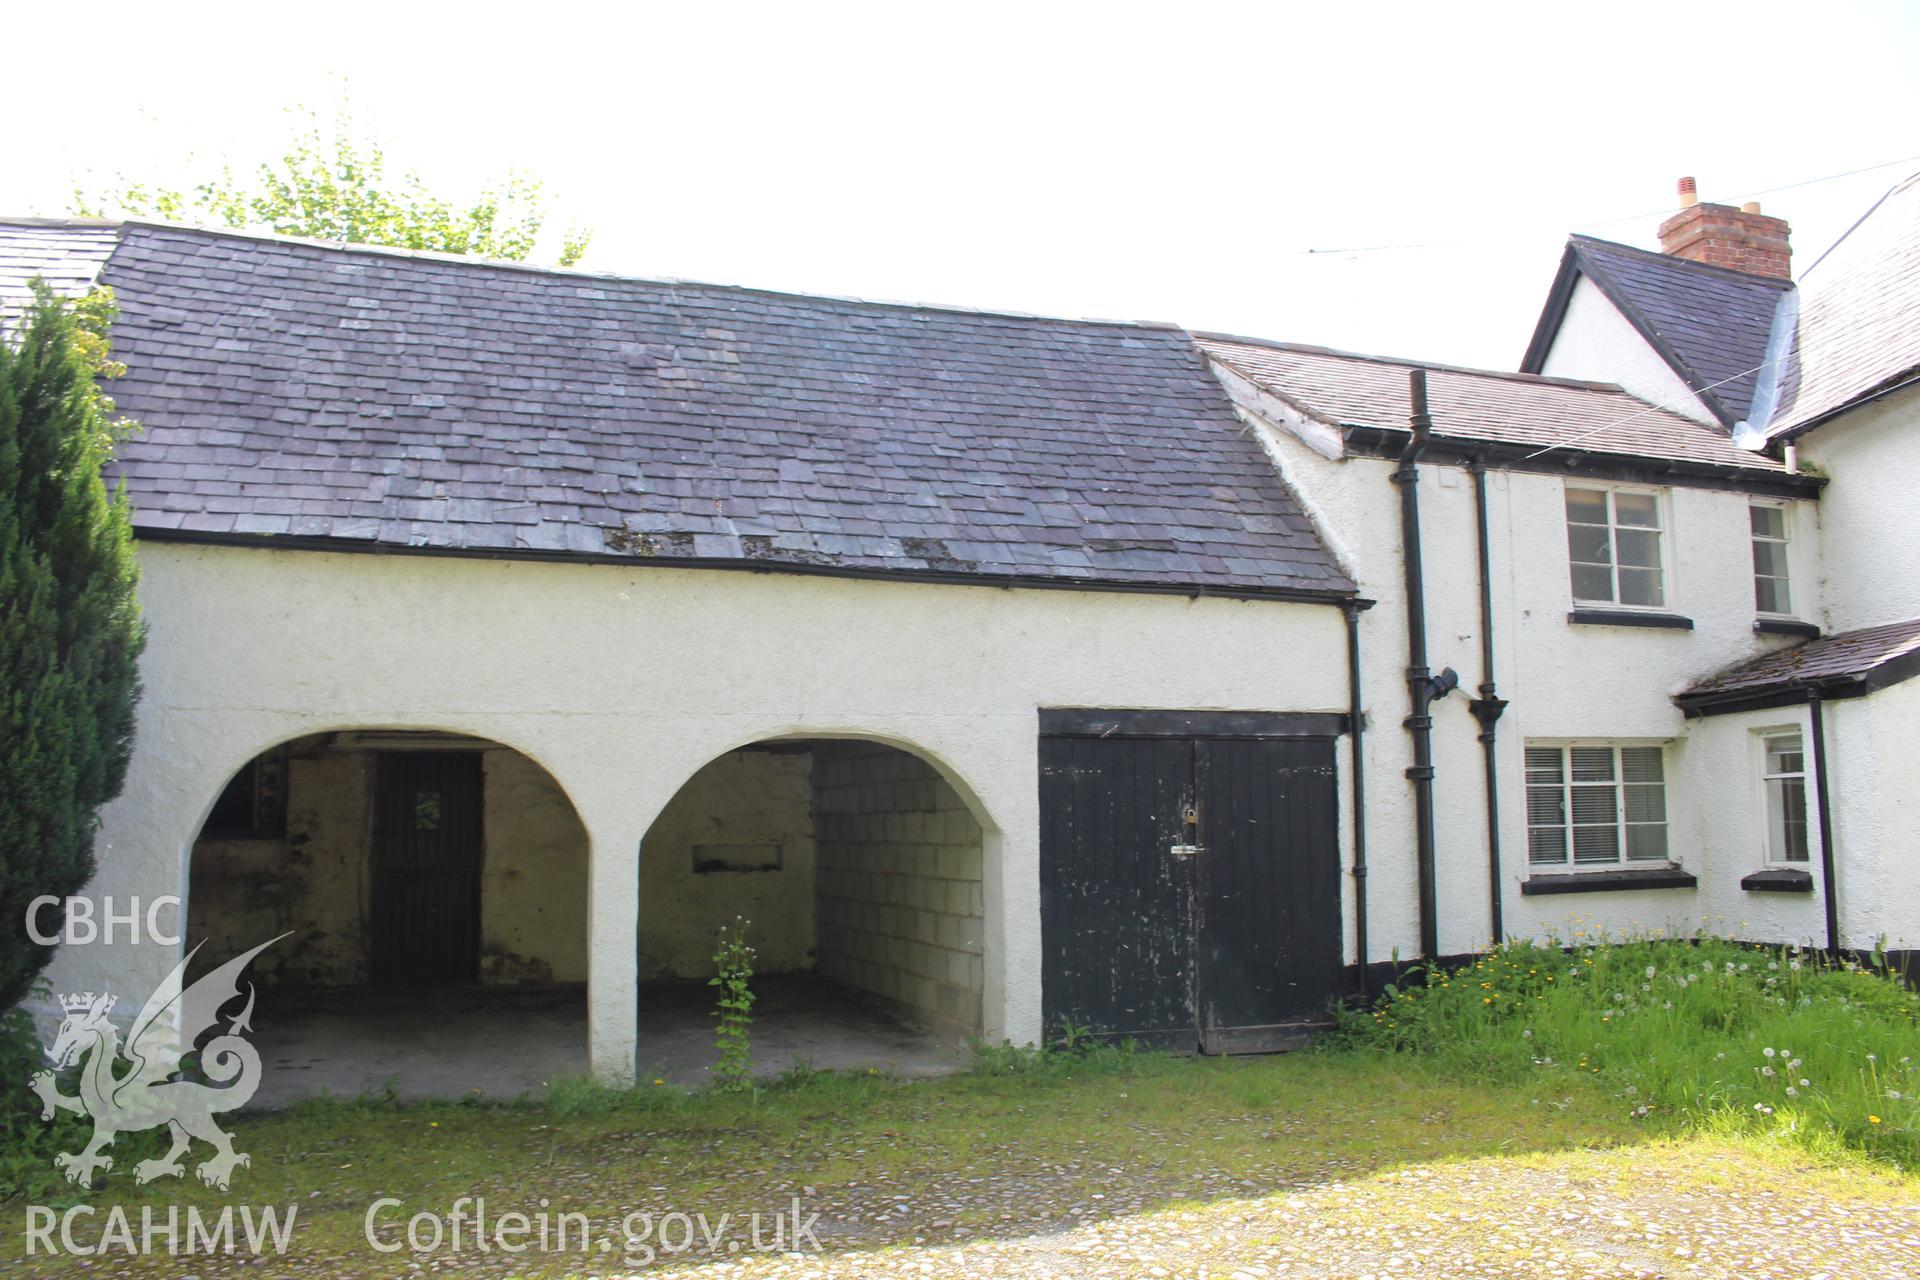 Colour photograph showing exterior view of outbuilding and rear of houses viewed from courtyard at rear of 5-7 Mwrog Street, Ruthin. Photographed during survey conducted by Geoff Ward on 14th May 2014.